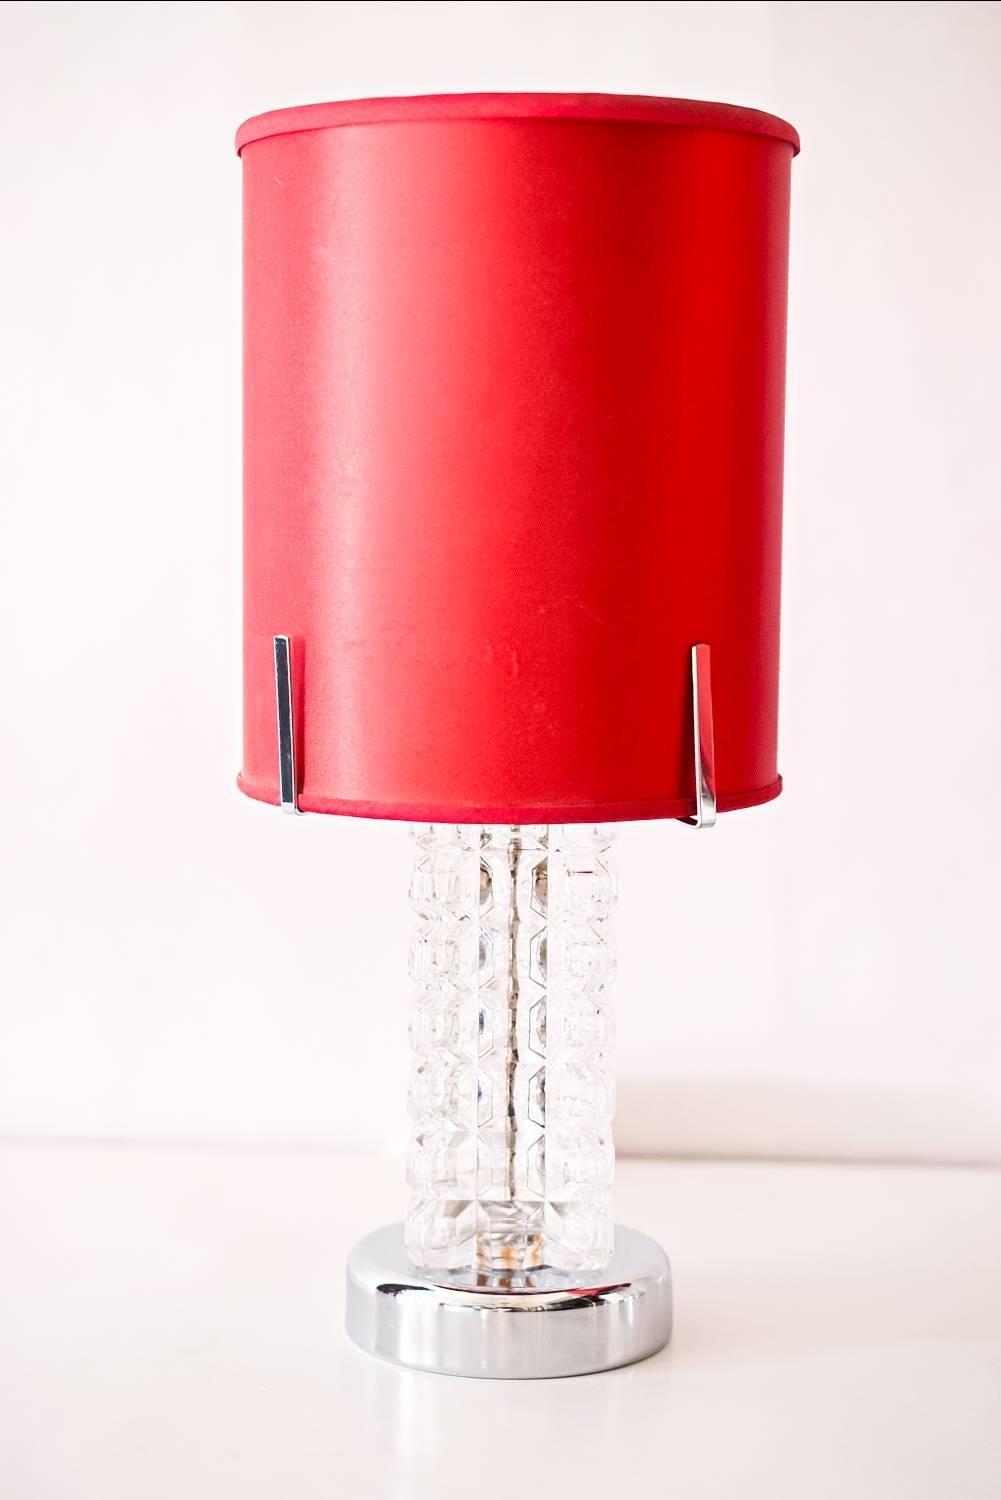 Austrian Two Austrolux Table Lamps with Original Red Fabric Shade For Sale